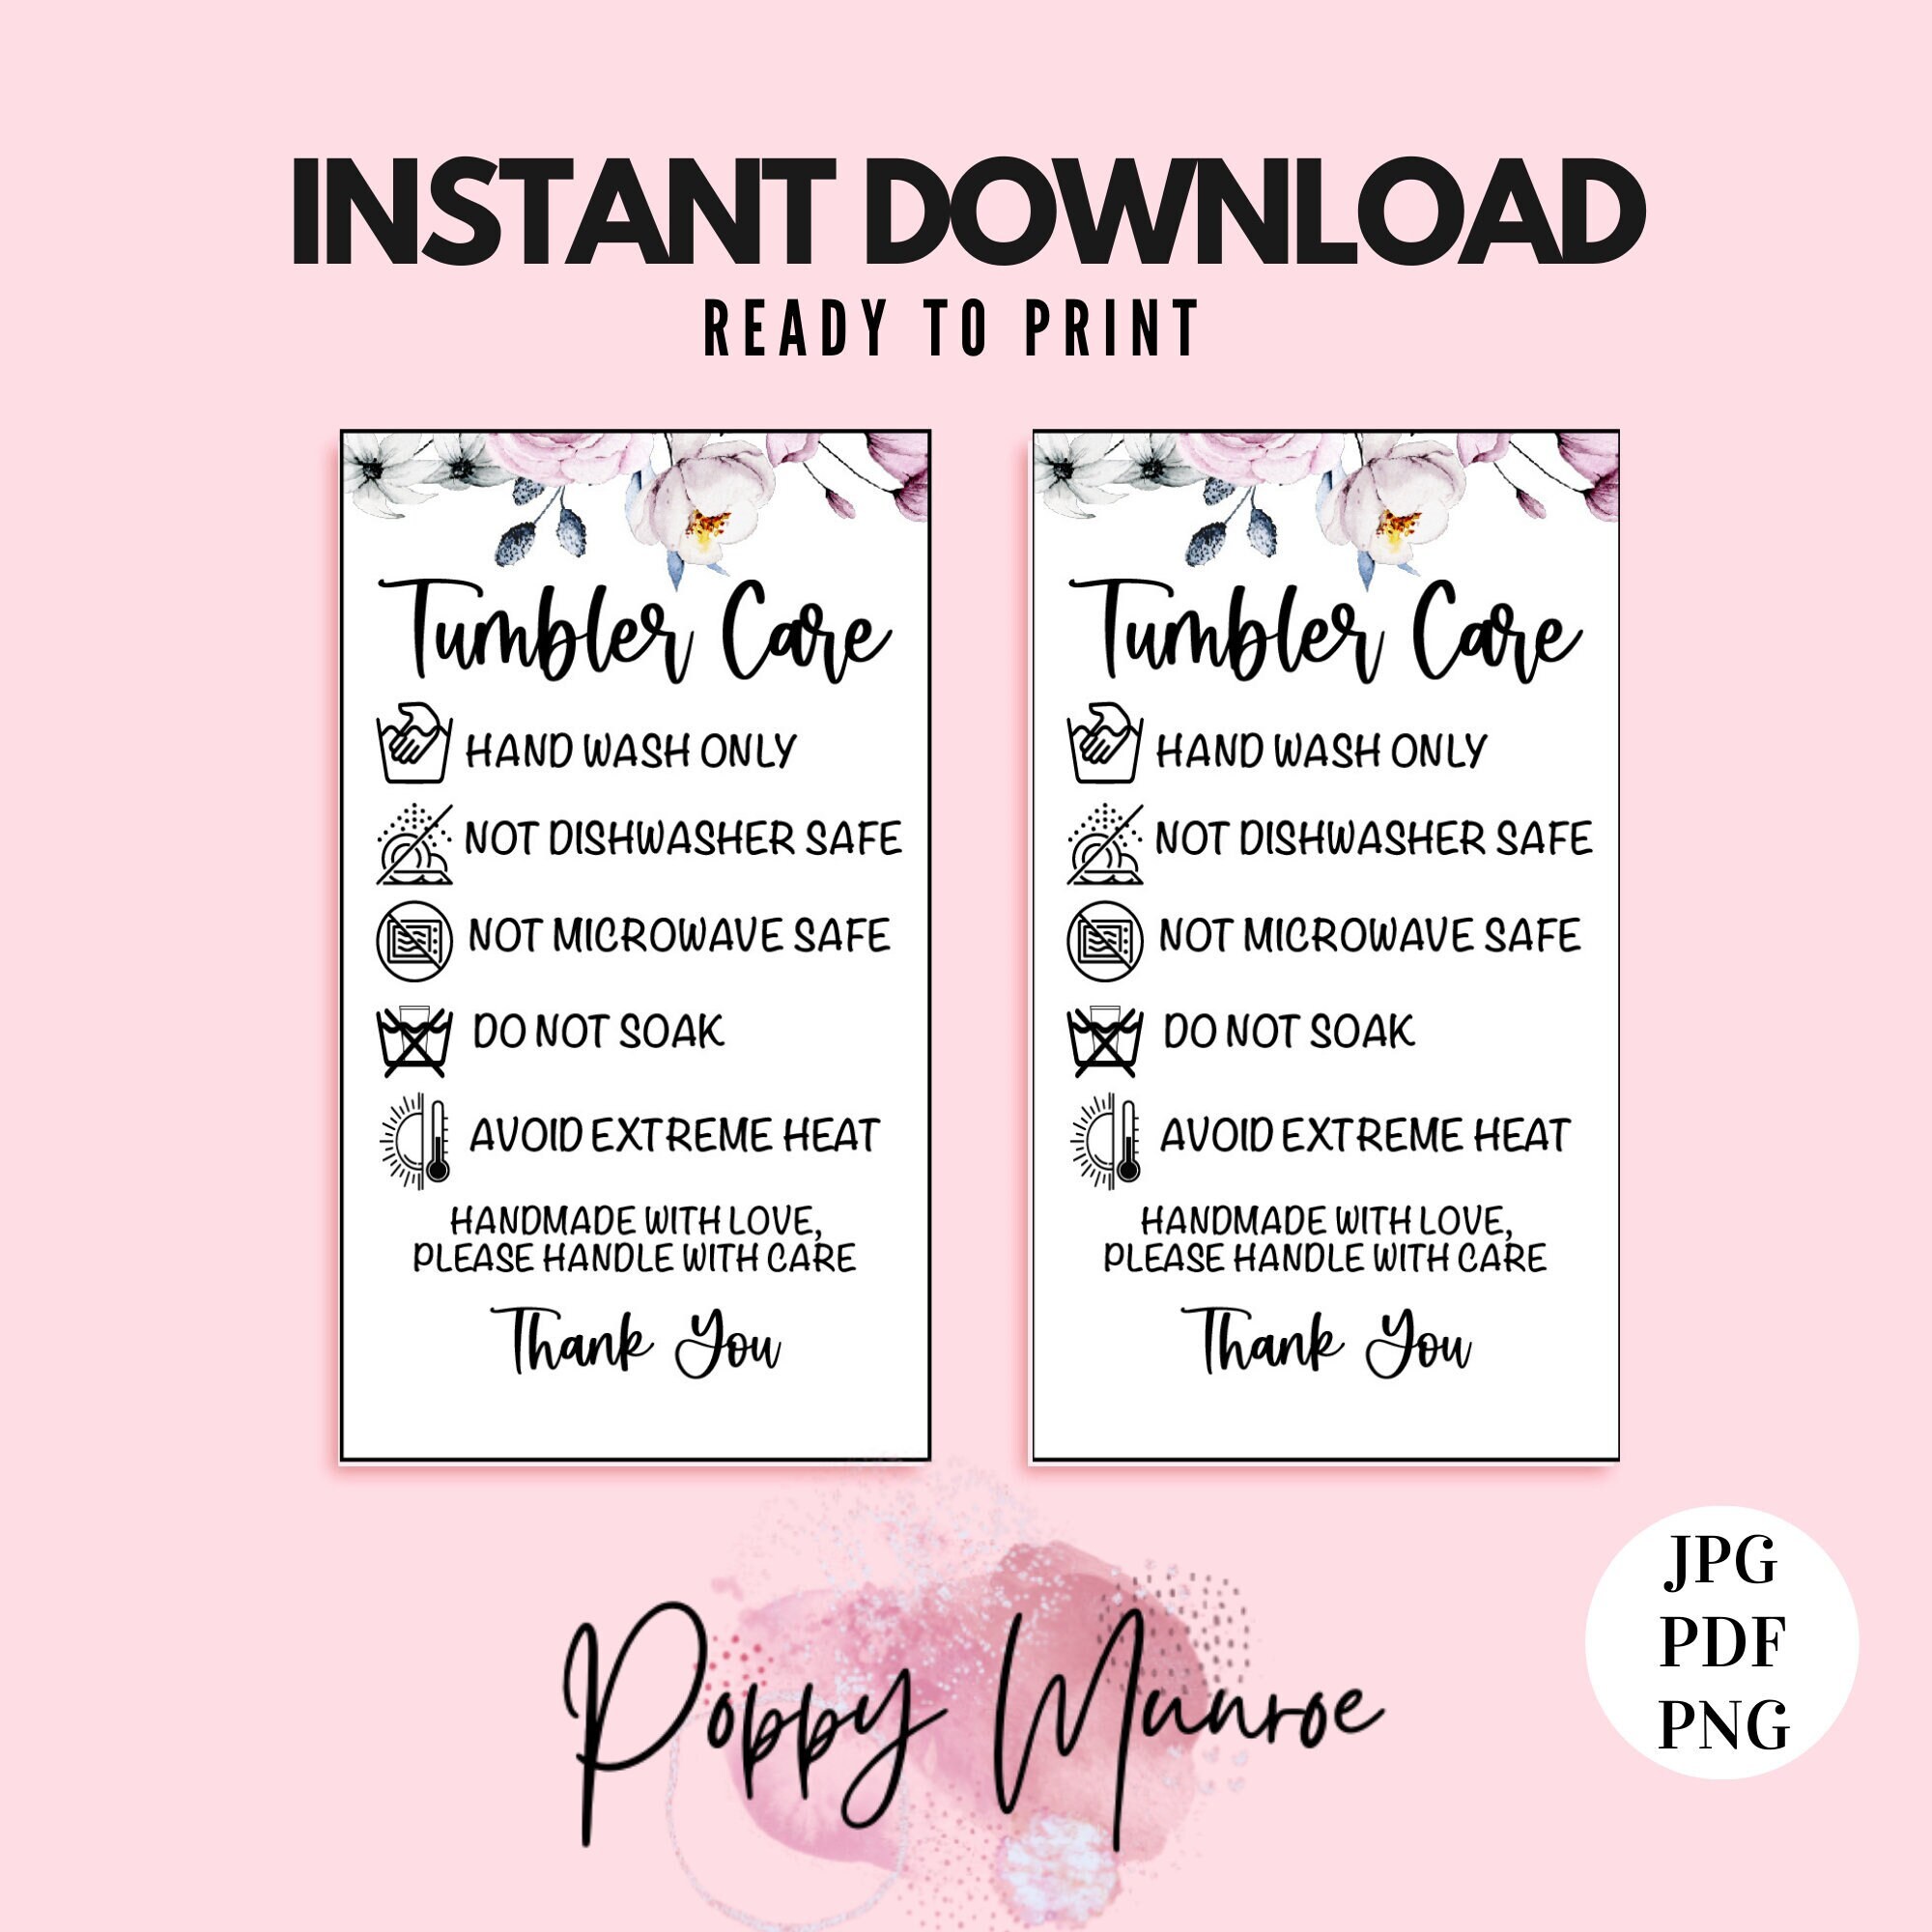 Tumbler Care Cards READY TO PRINT, Instructions Card, Tumbler Instructions,  Cup Care, Printable, Customer Reminder, Digital Files